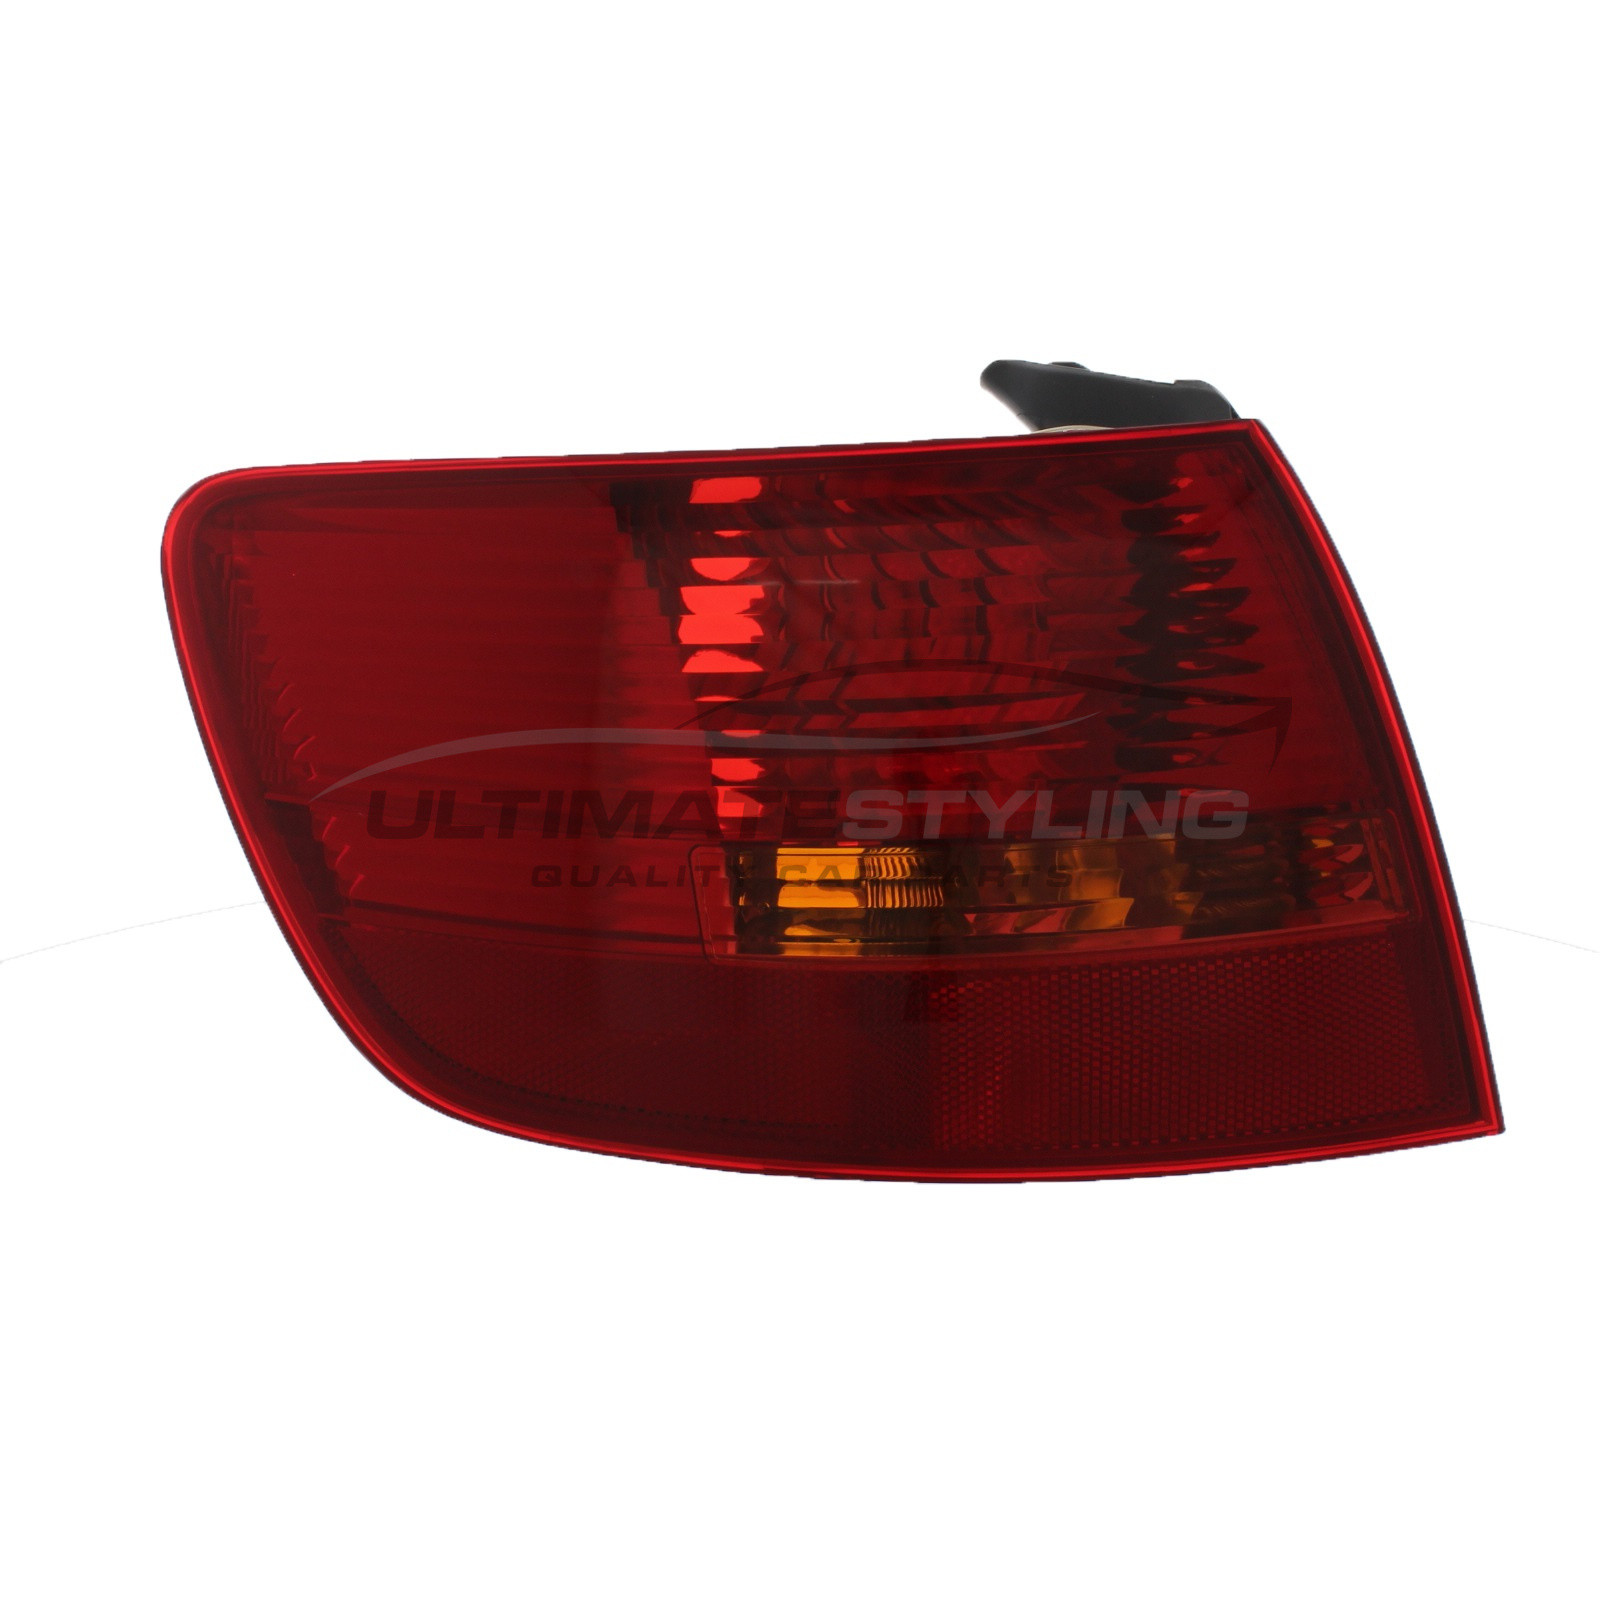 Audi A6 2005-2008 / Audi Allroad 2005-2007 / Audi S6 2006-2007 Non-LED Outer (Wing) Rear Light / Tail Light Excluding Bulb Holder Passenger Side (LH)